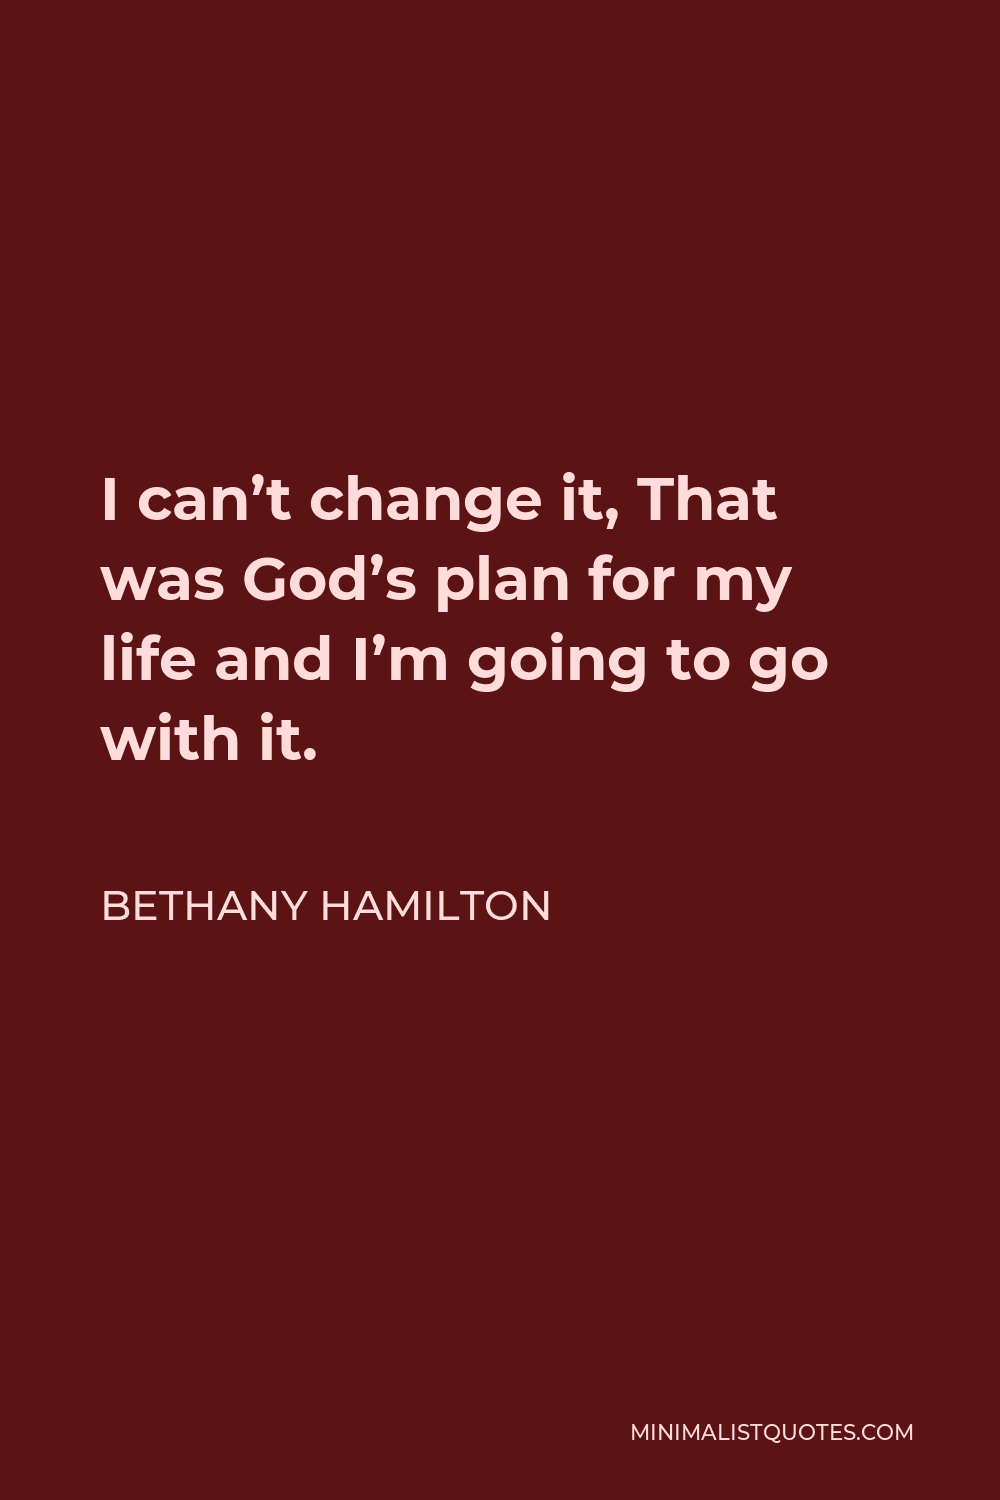 Bethany Hamilton Quote - I can’t change it, That was God’s plan for my life and I’m going to go with it.